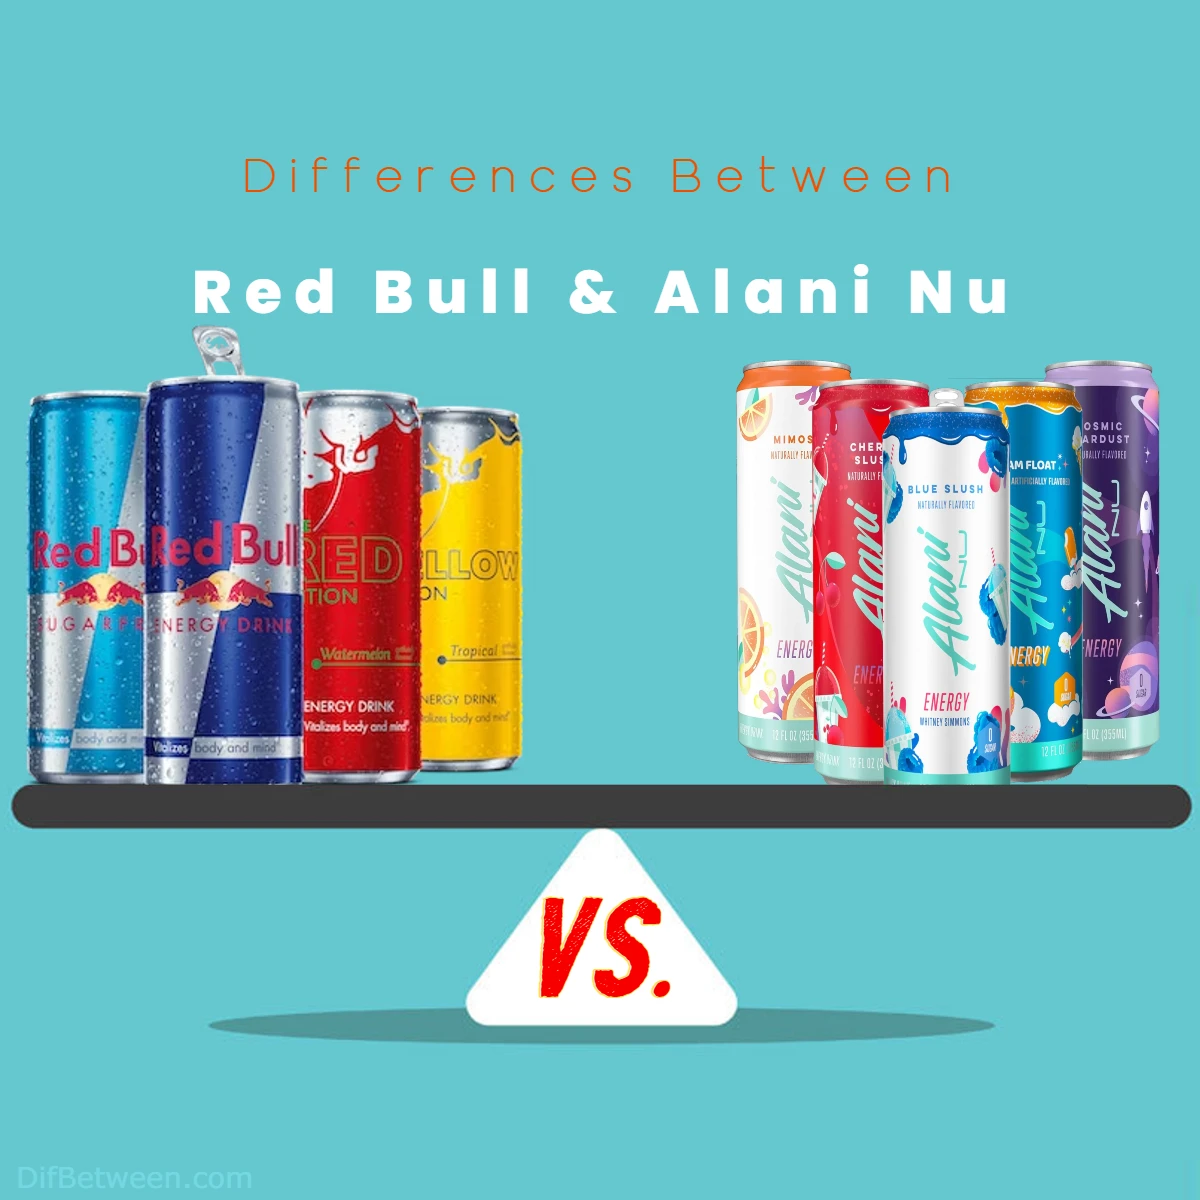 Differences Between Alani Nu and Red Bull